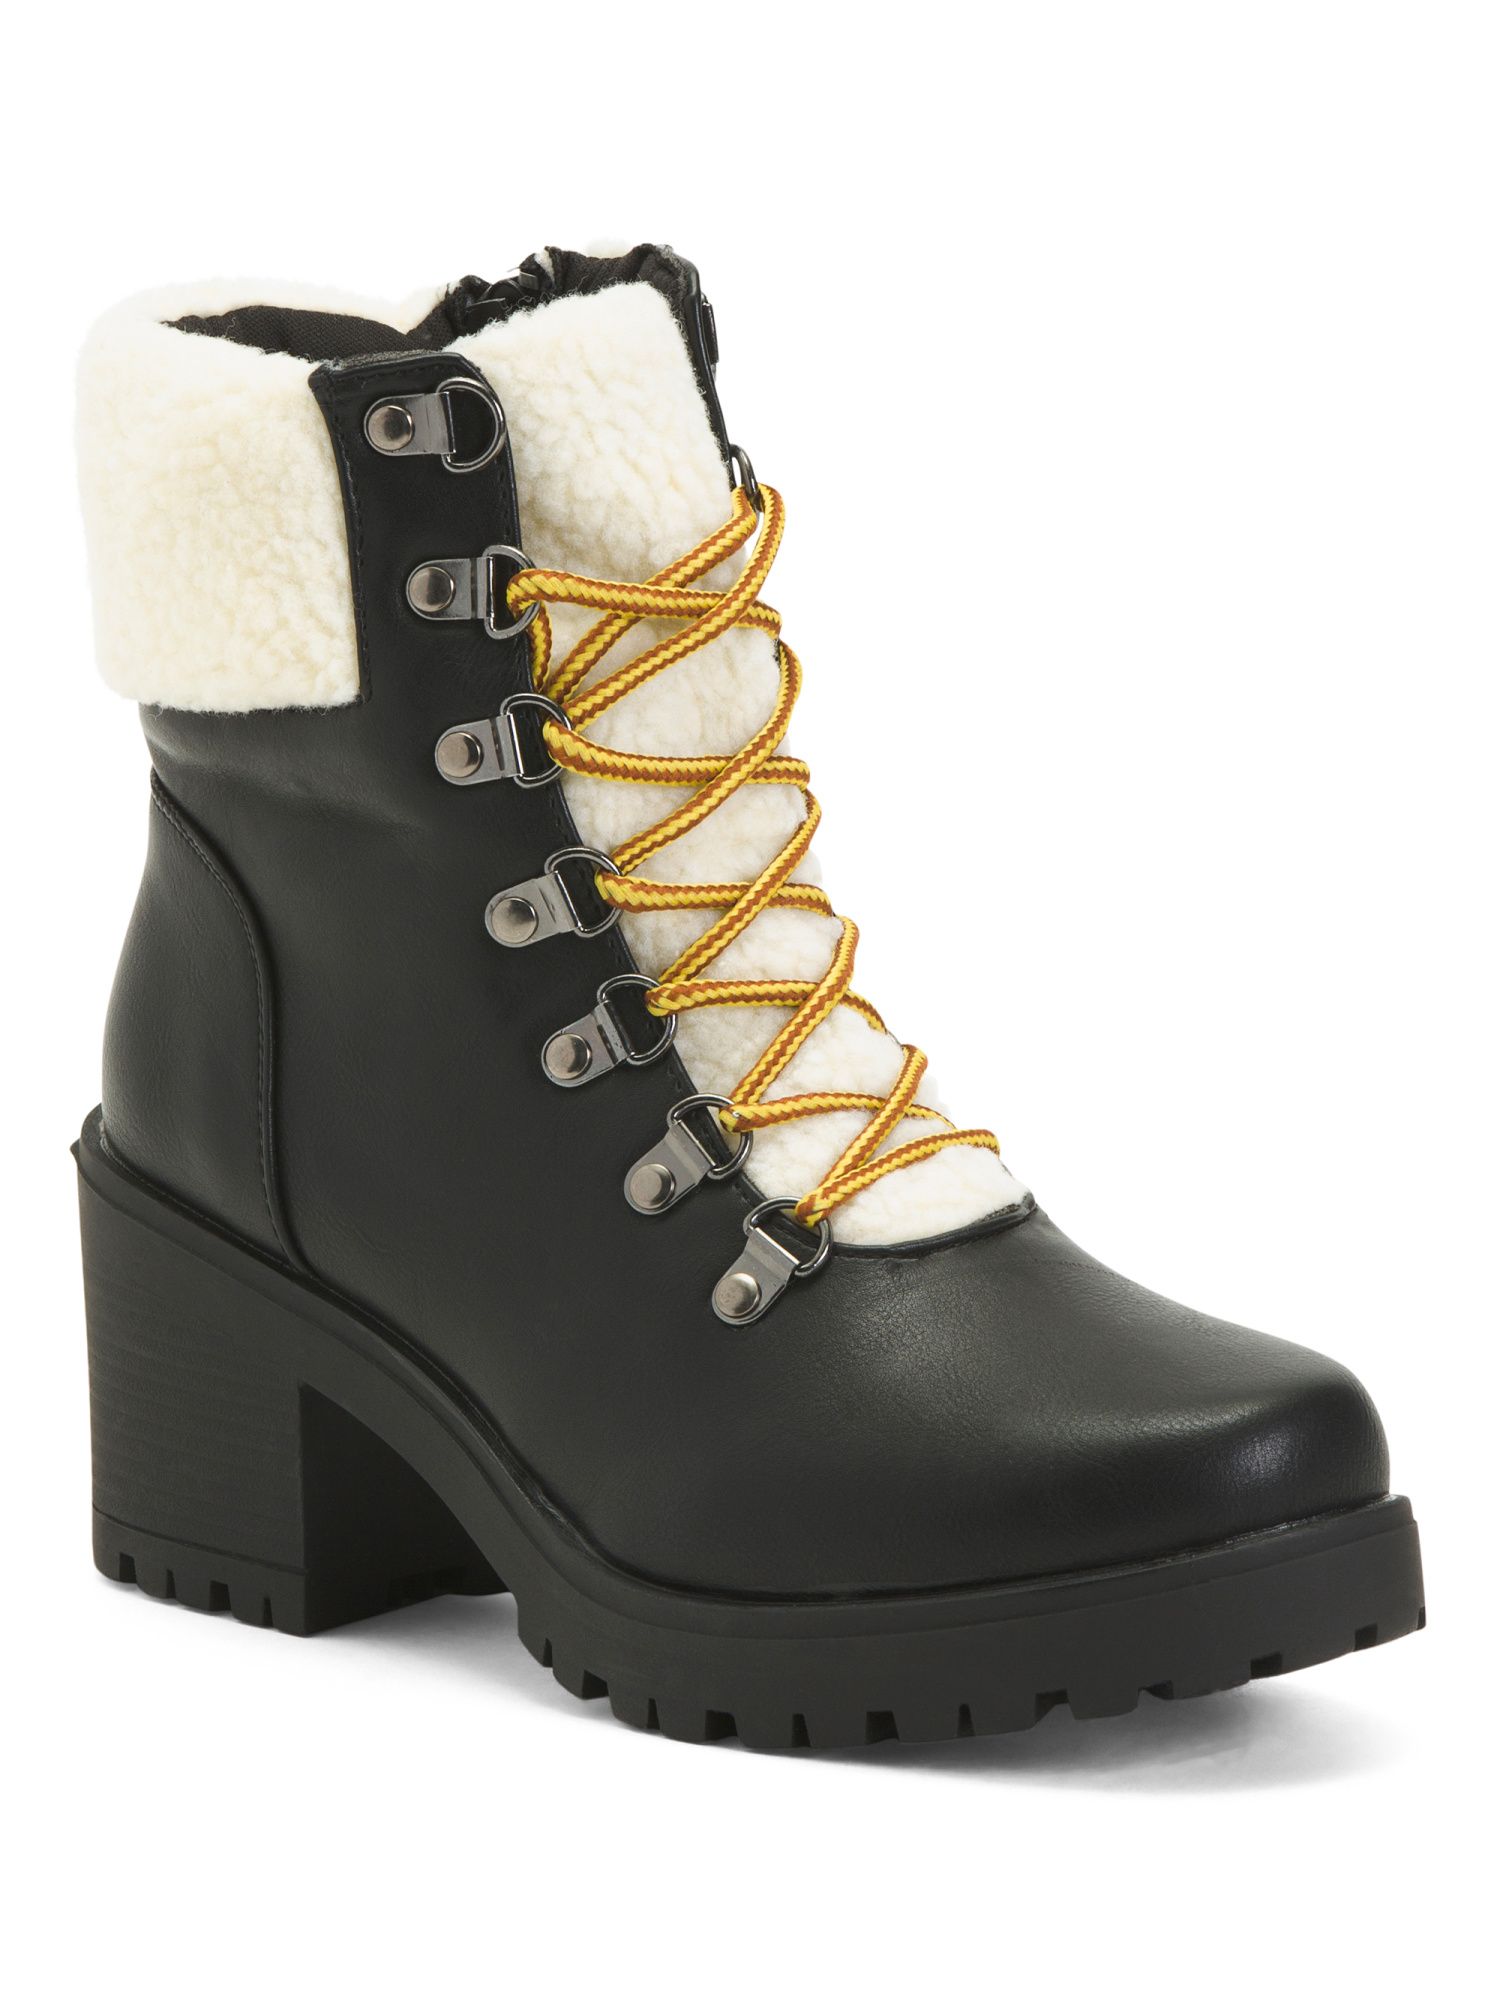 Cozy Lined Lace Up Hiker Boots | Marshalls